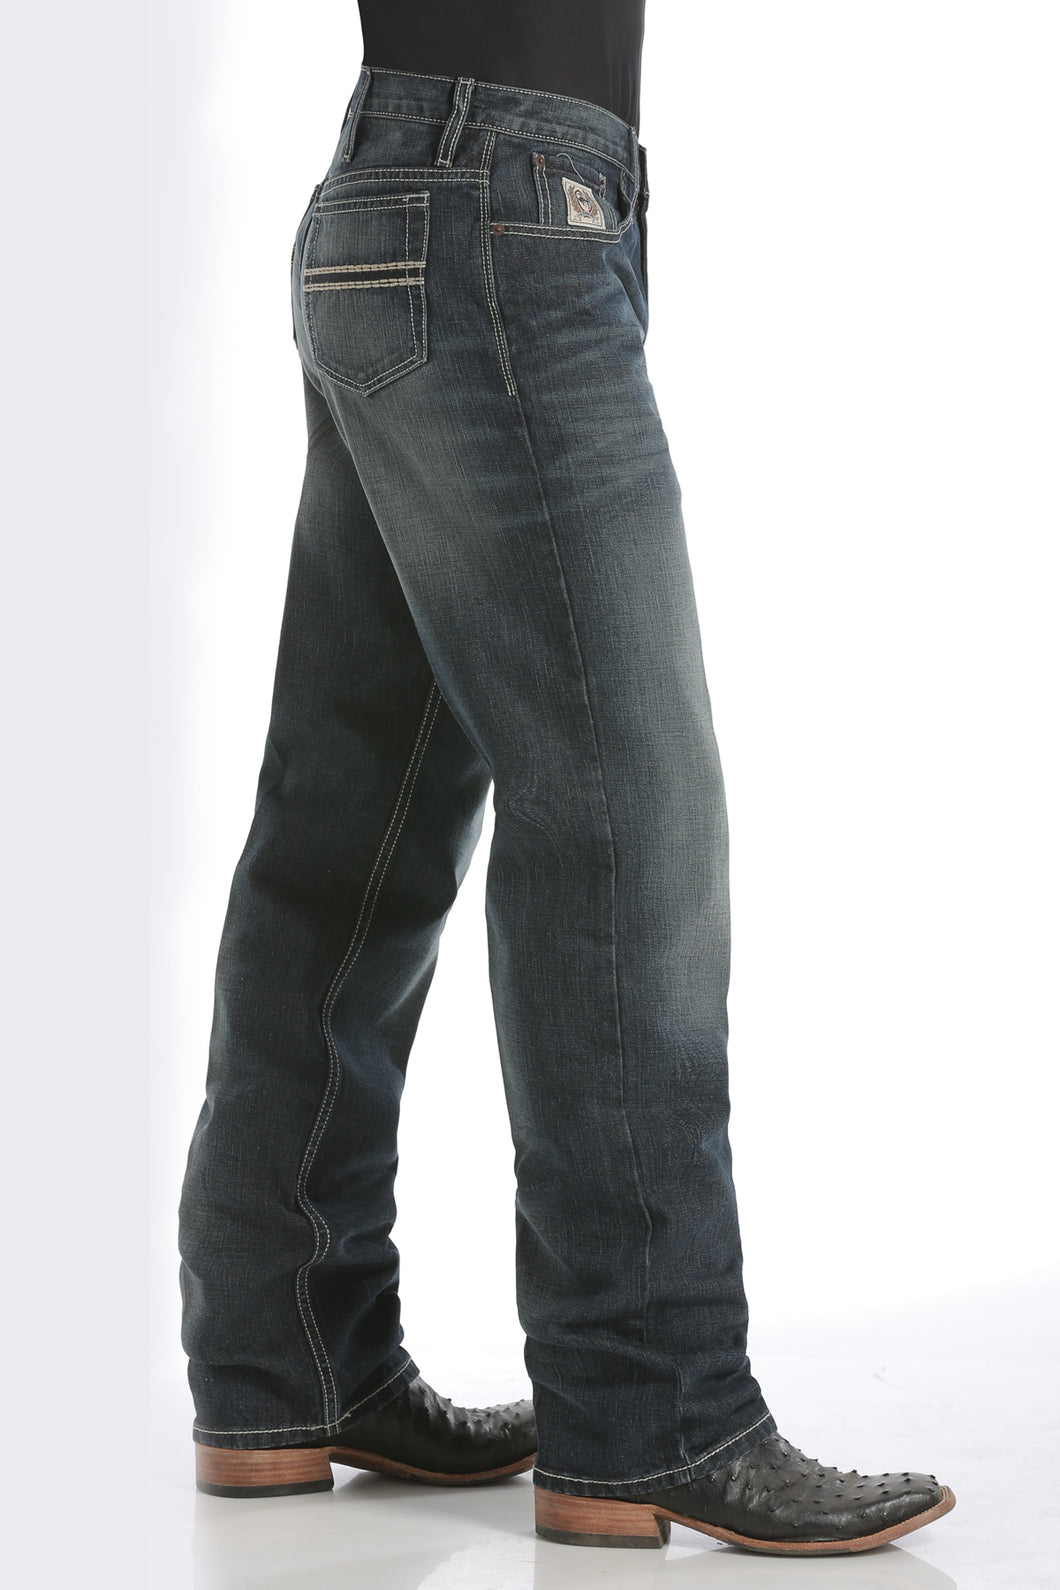 MEN'S RELAXED FIT WHITE LABEL JEANS - DARK STONEWASH